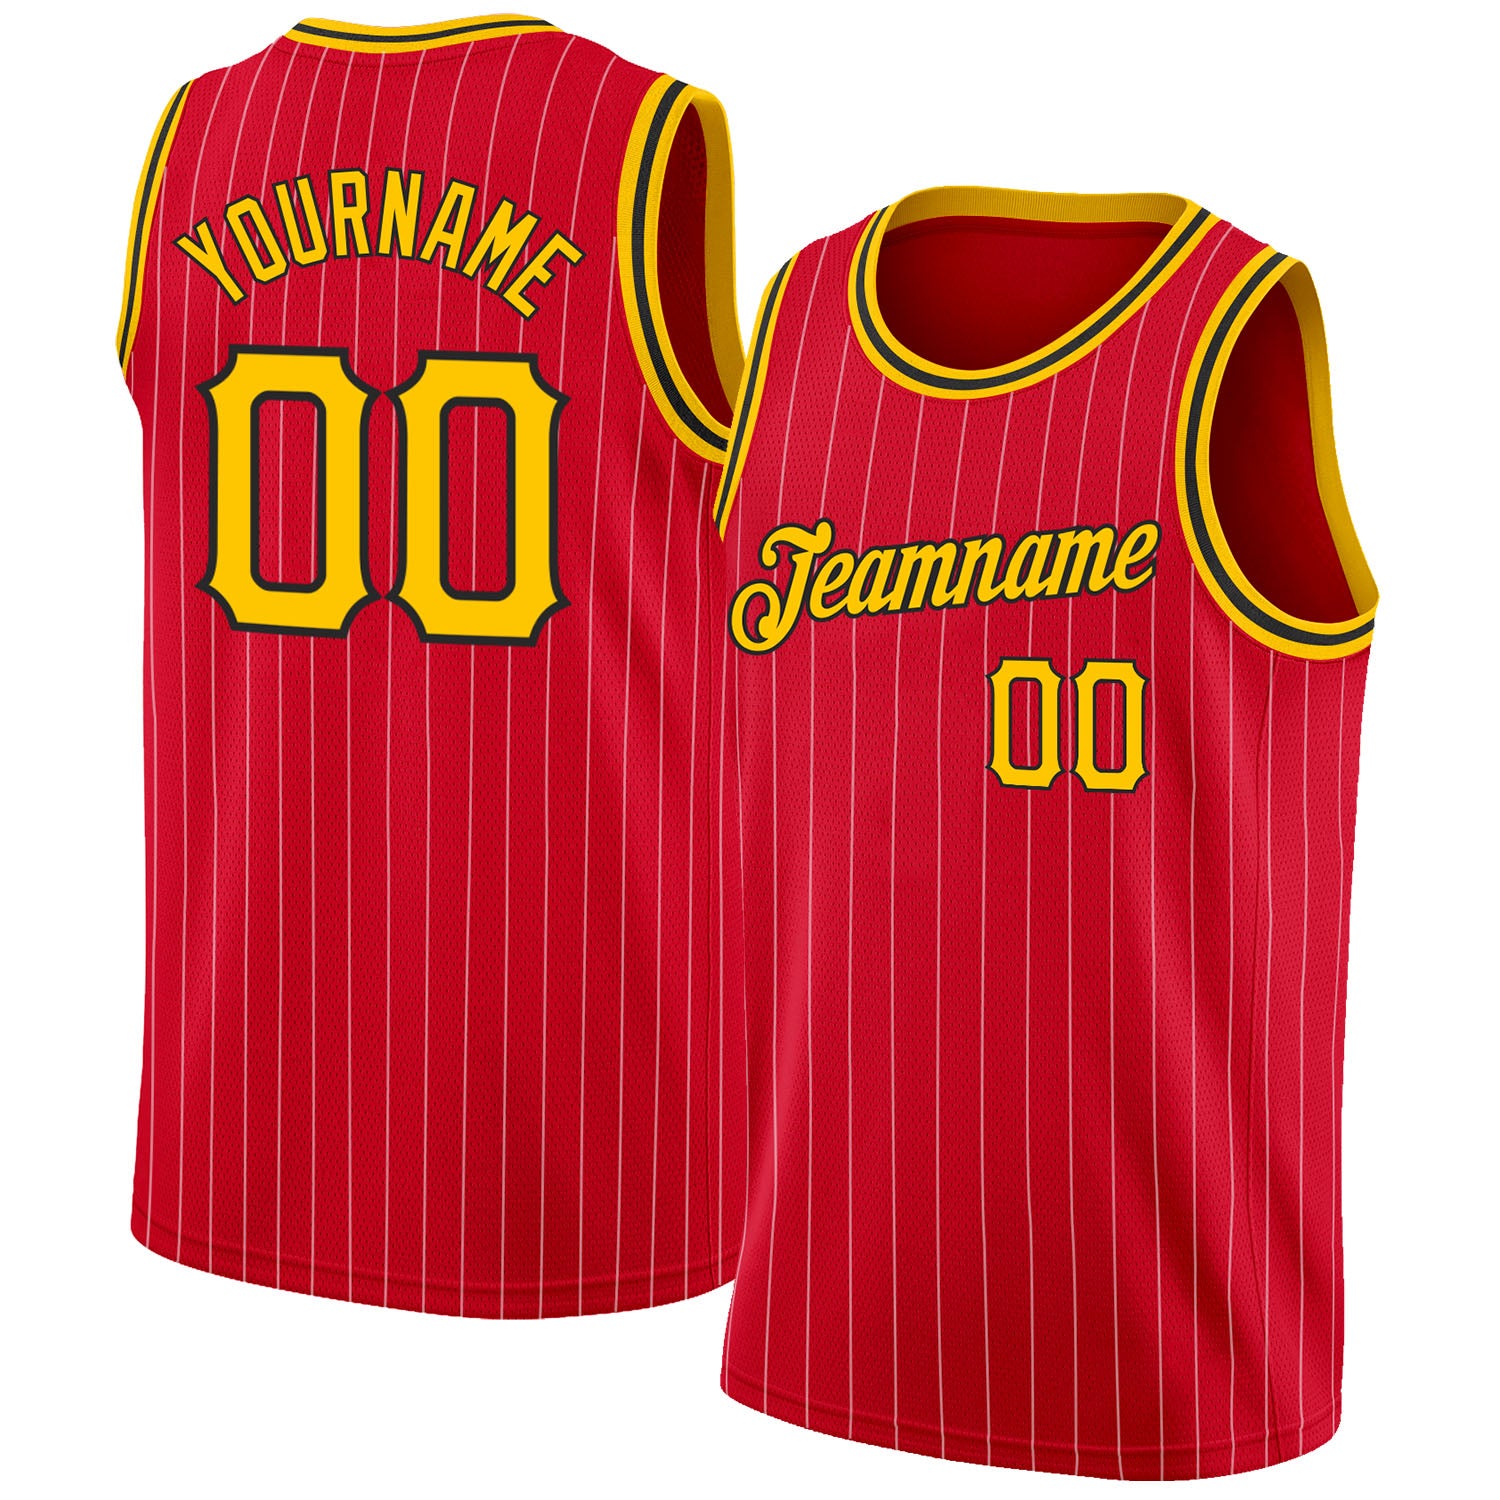 Custom Red Gold Pinstripe Gold-Black Authentic Throwback Basketball Jersey  Discount